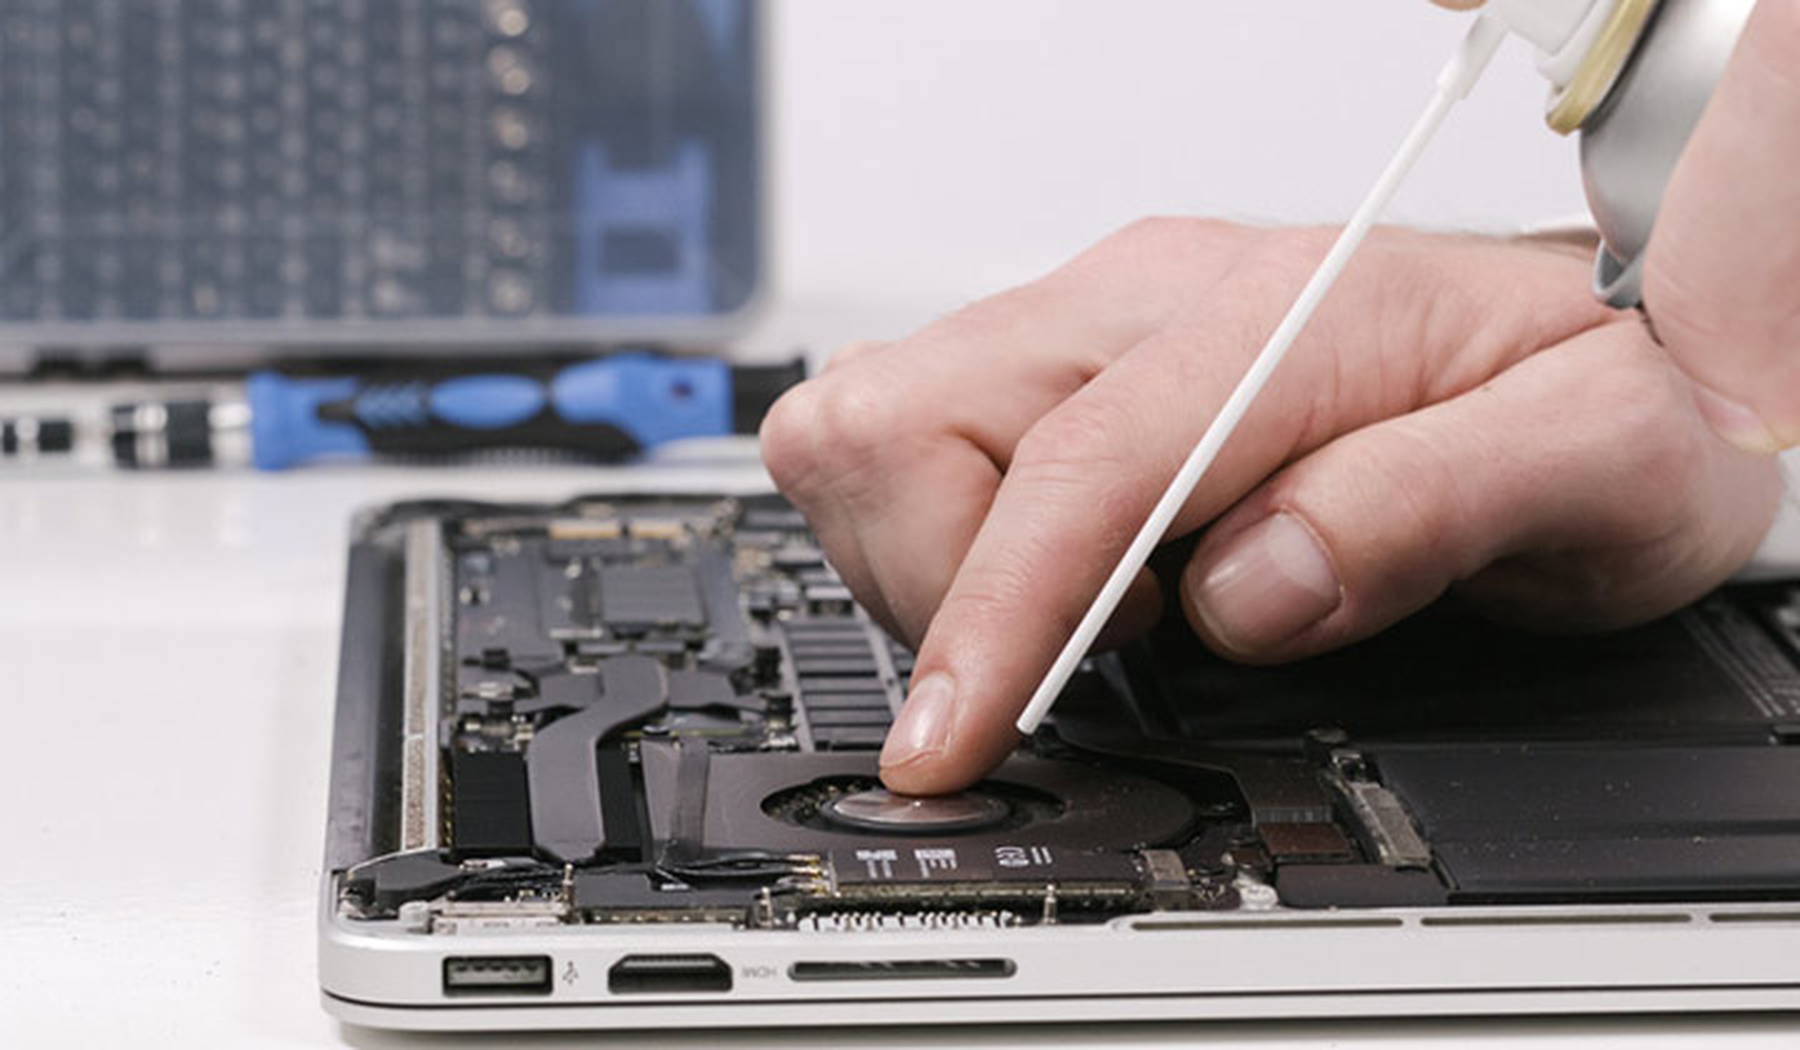 Laptop being cleaned with compressed air